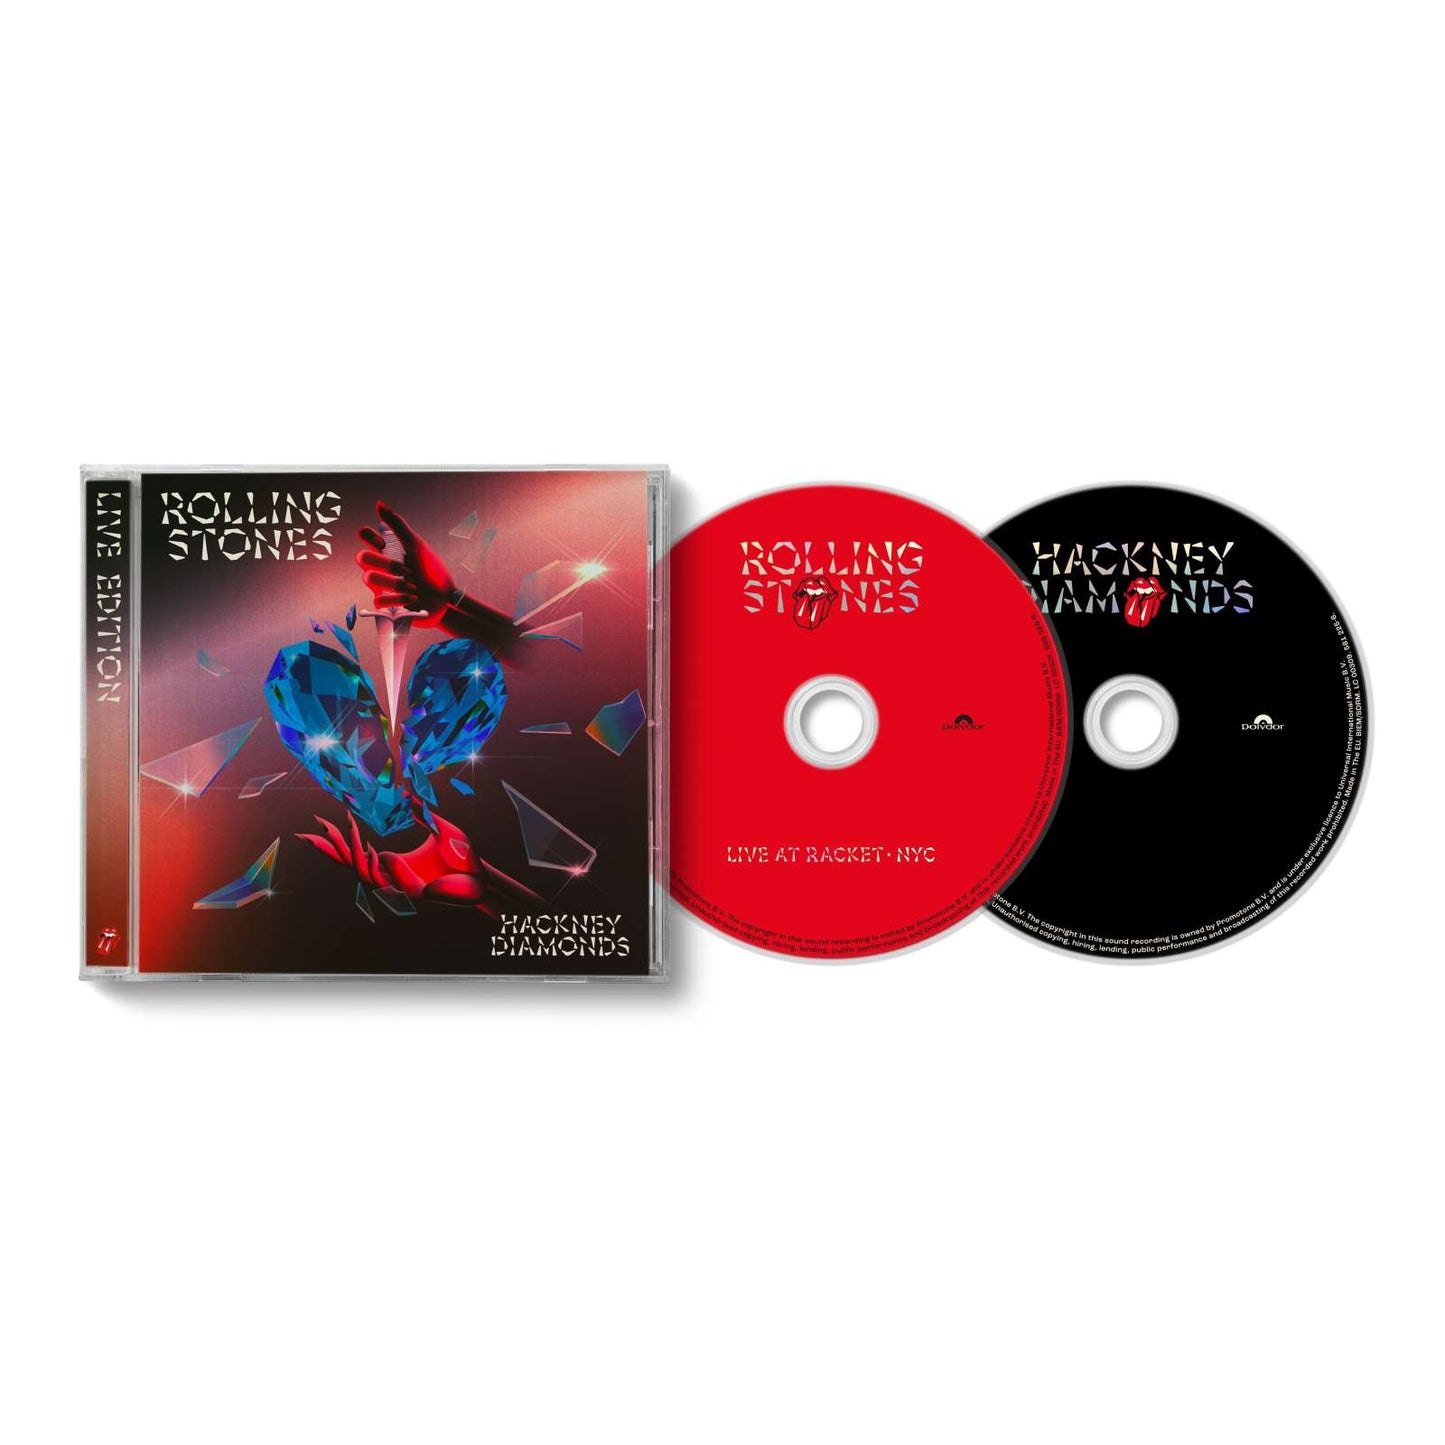 The Rolling Stones: Hackney Diamonds (Live Edition) (Limited Edition) 2cds